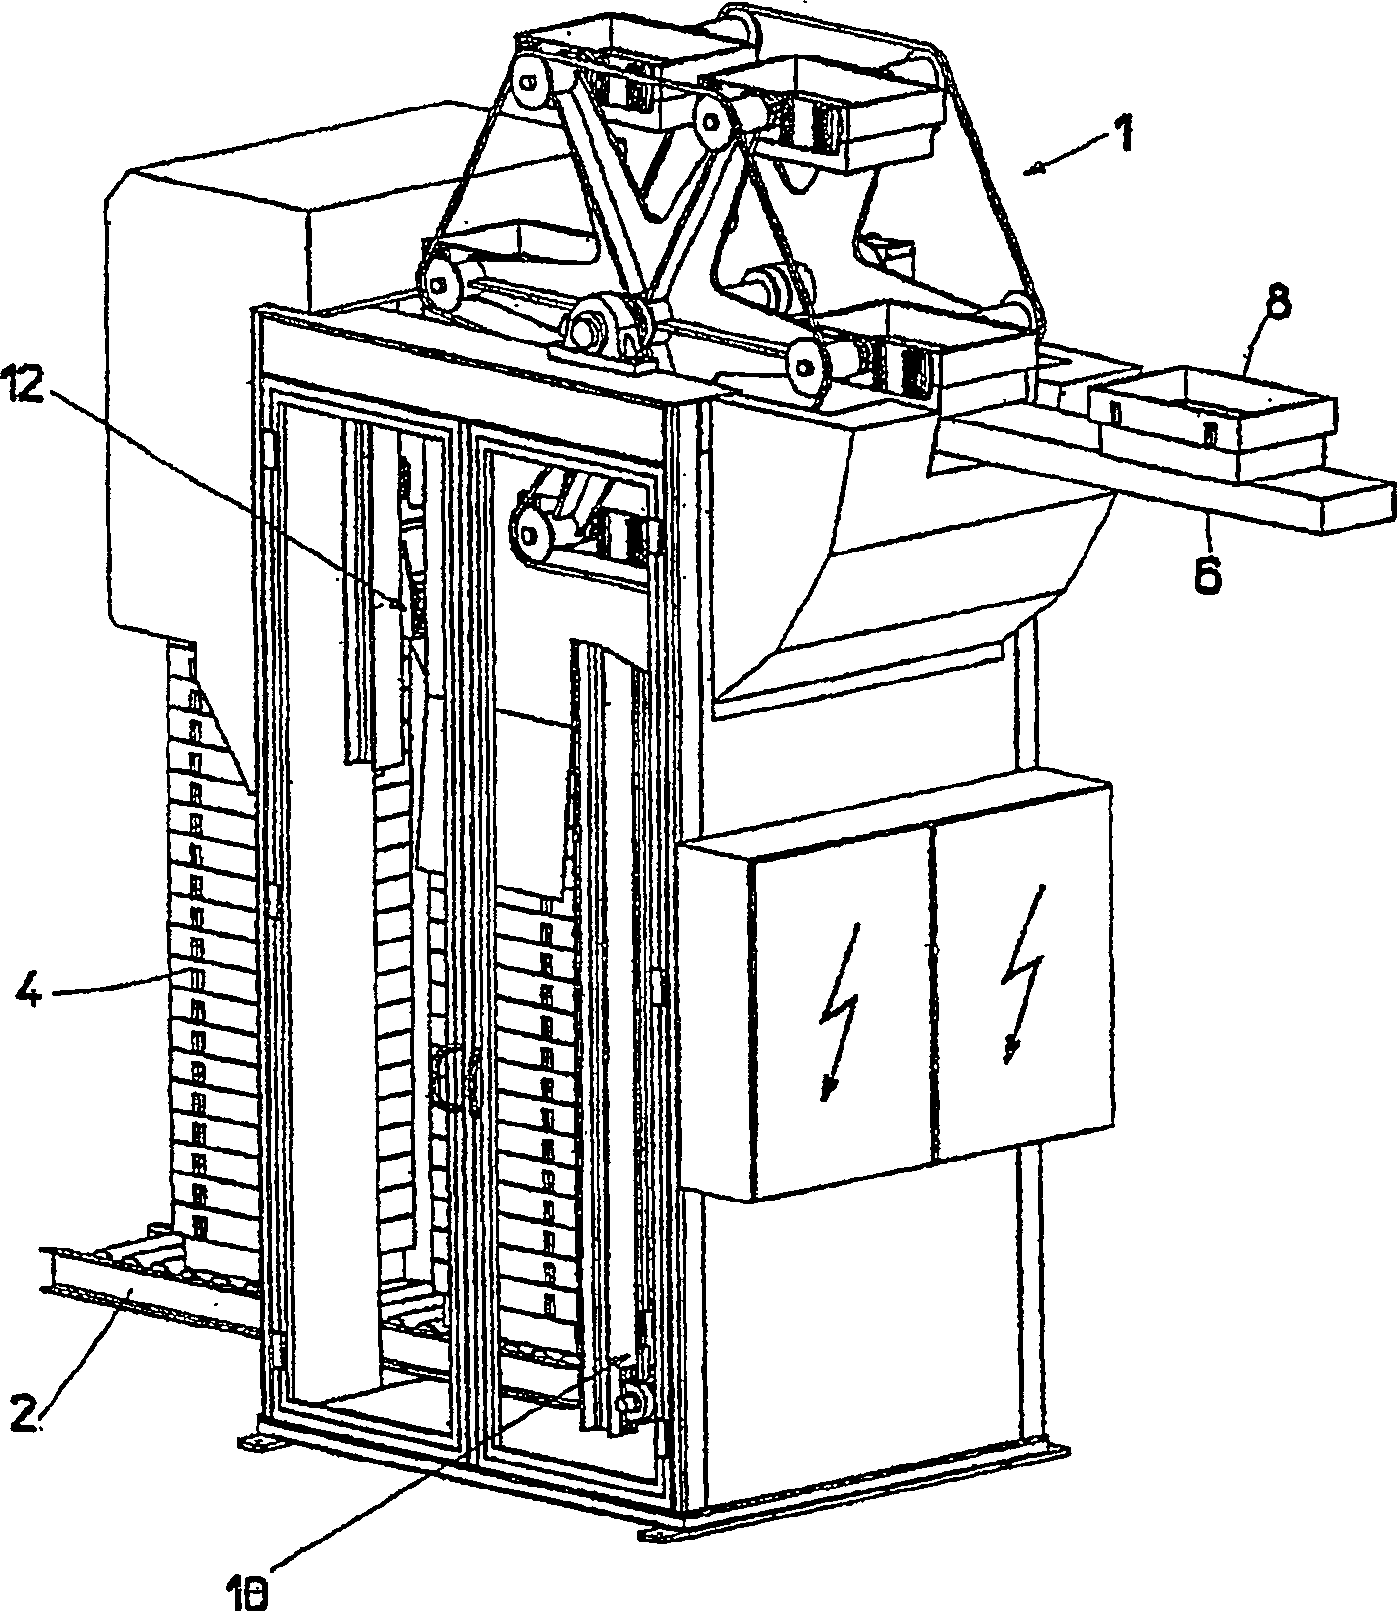 Device for stacking and unstacking objects